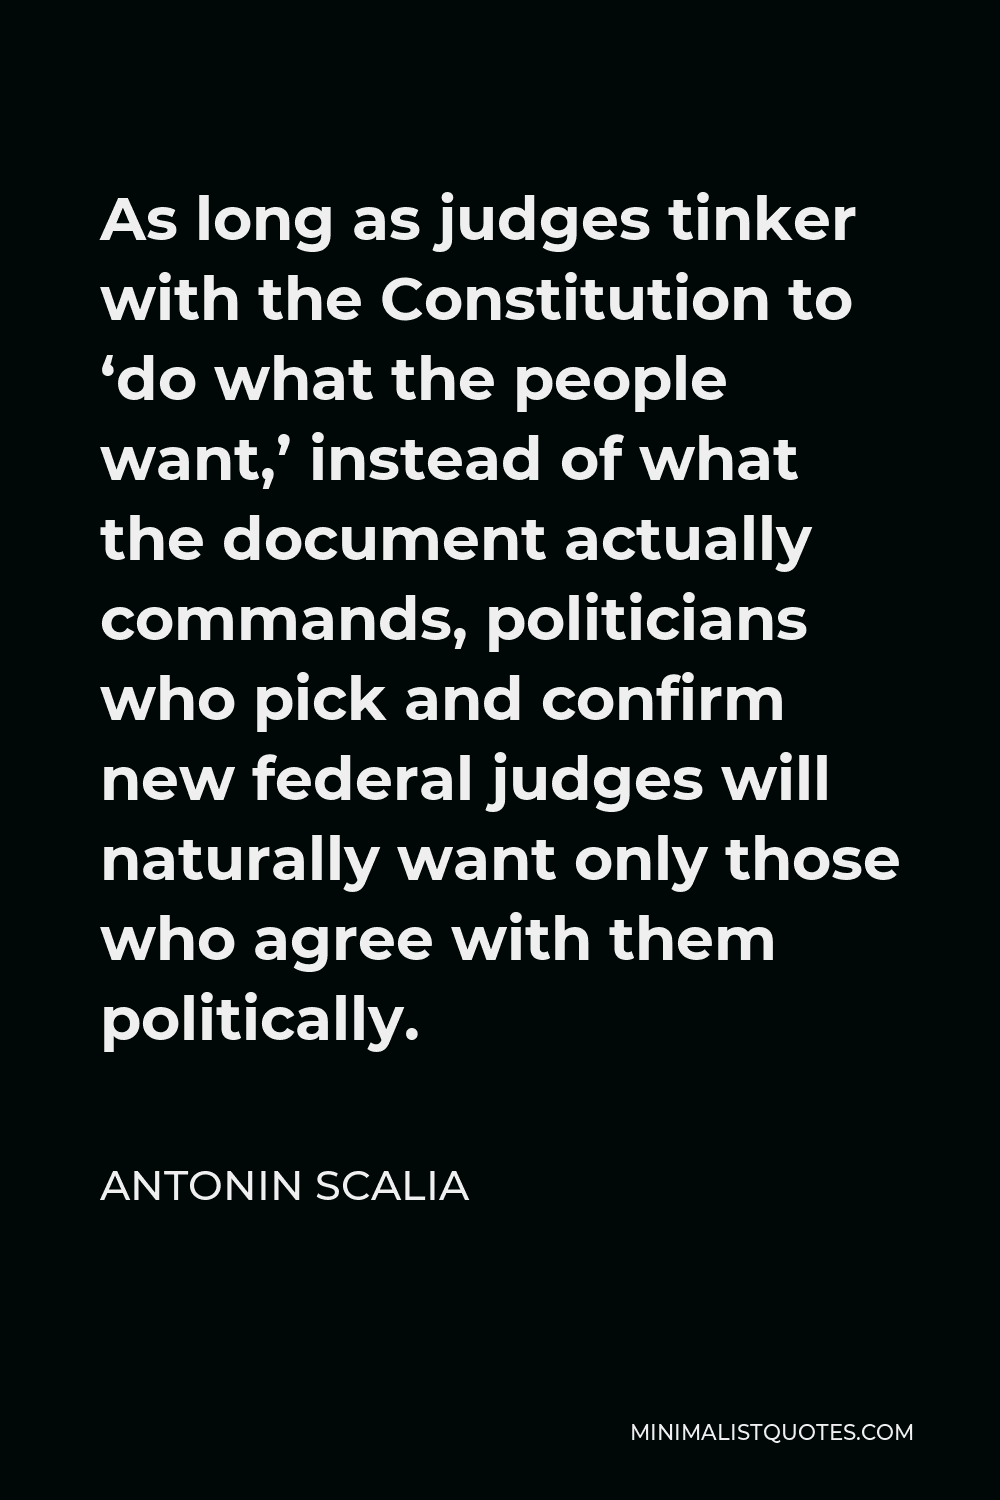 Antonin Scalia Quote - As long as judges tinker with the Constitution to ‘do what the people want,’ instead of what the document actually commands, politicians who pick and confirm new federal judges will naturally want only those who agree with them politically.